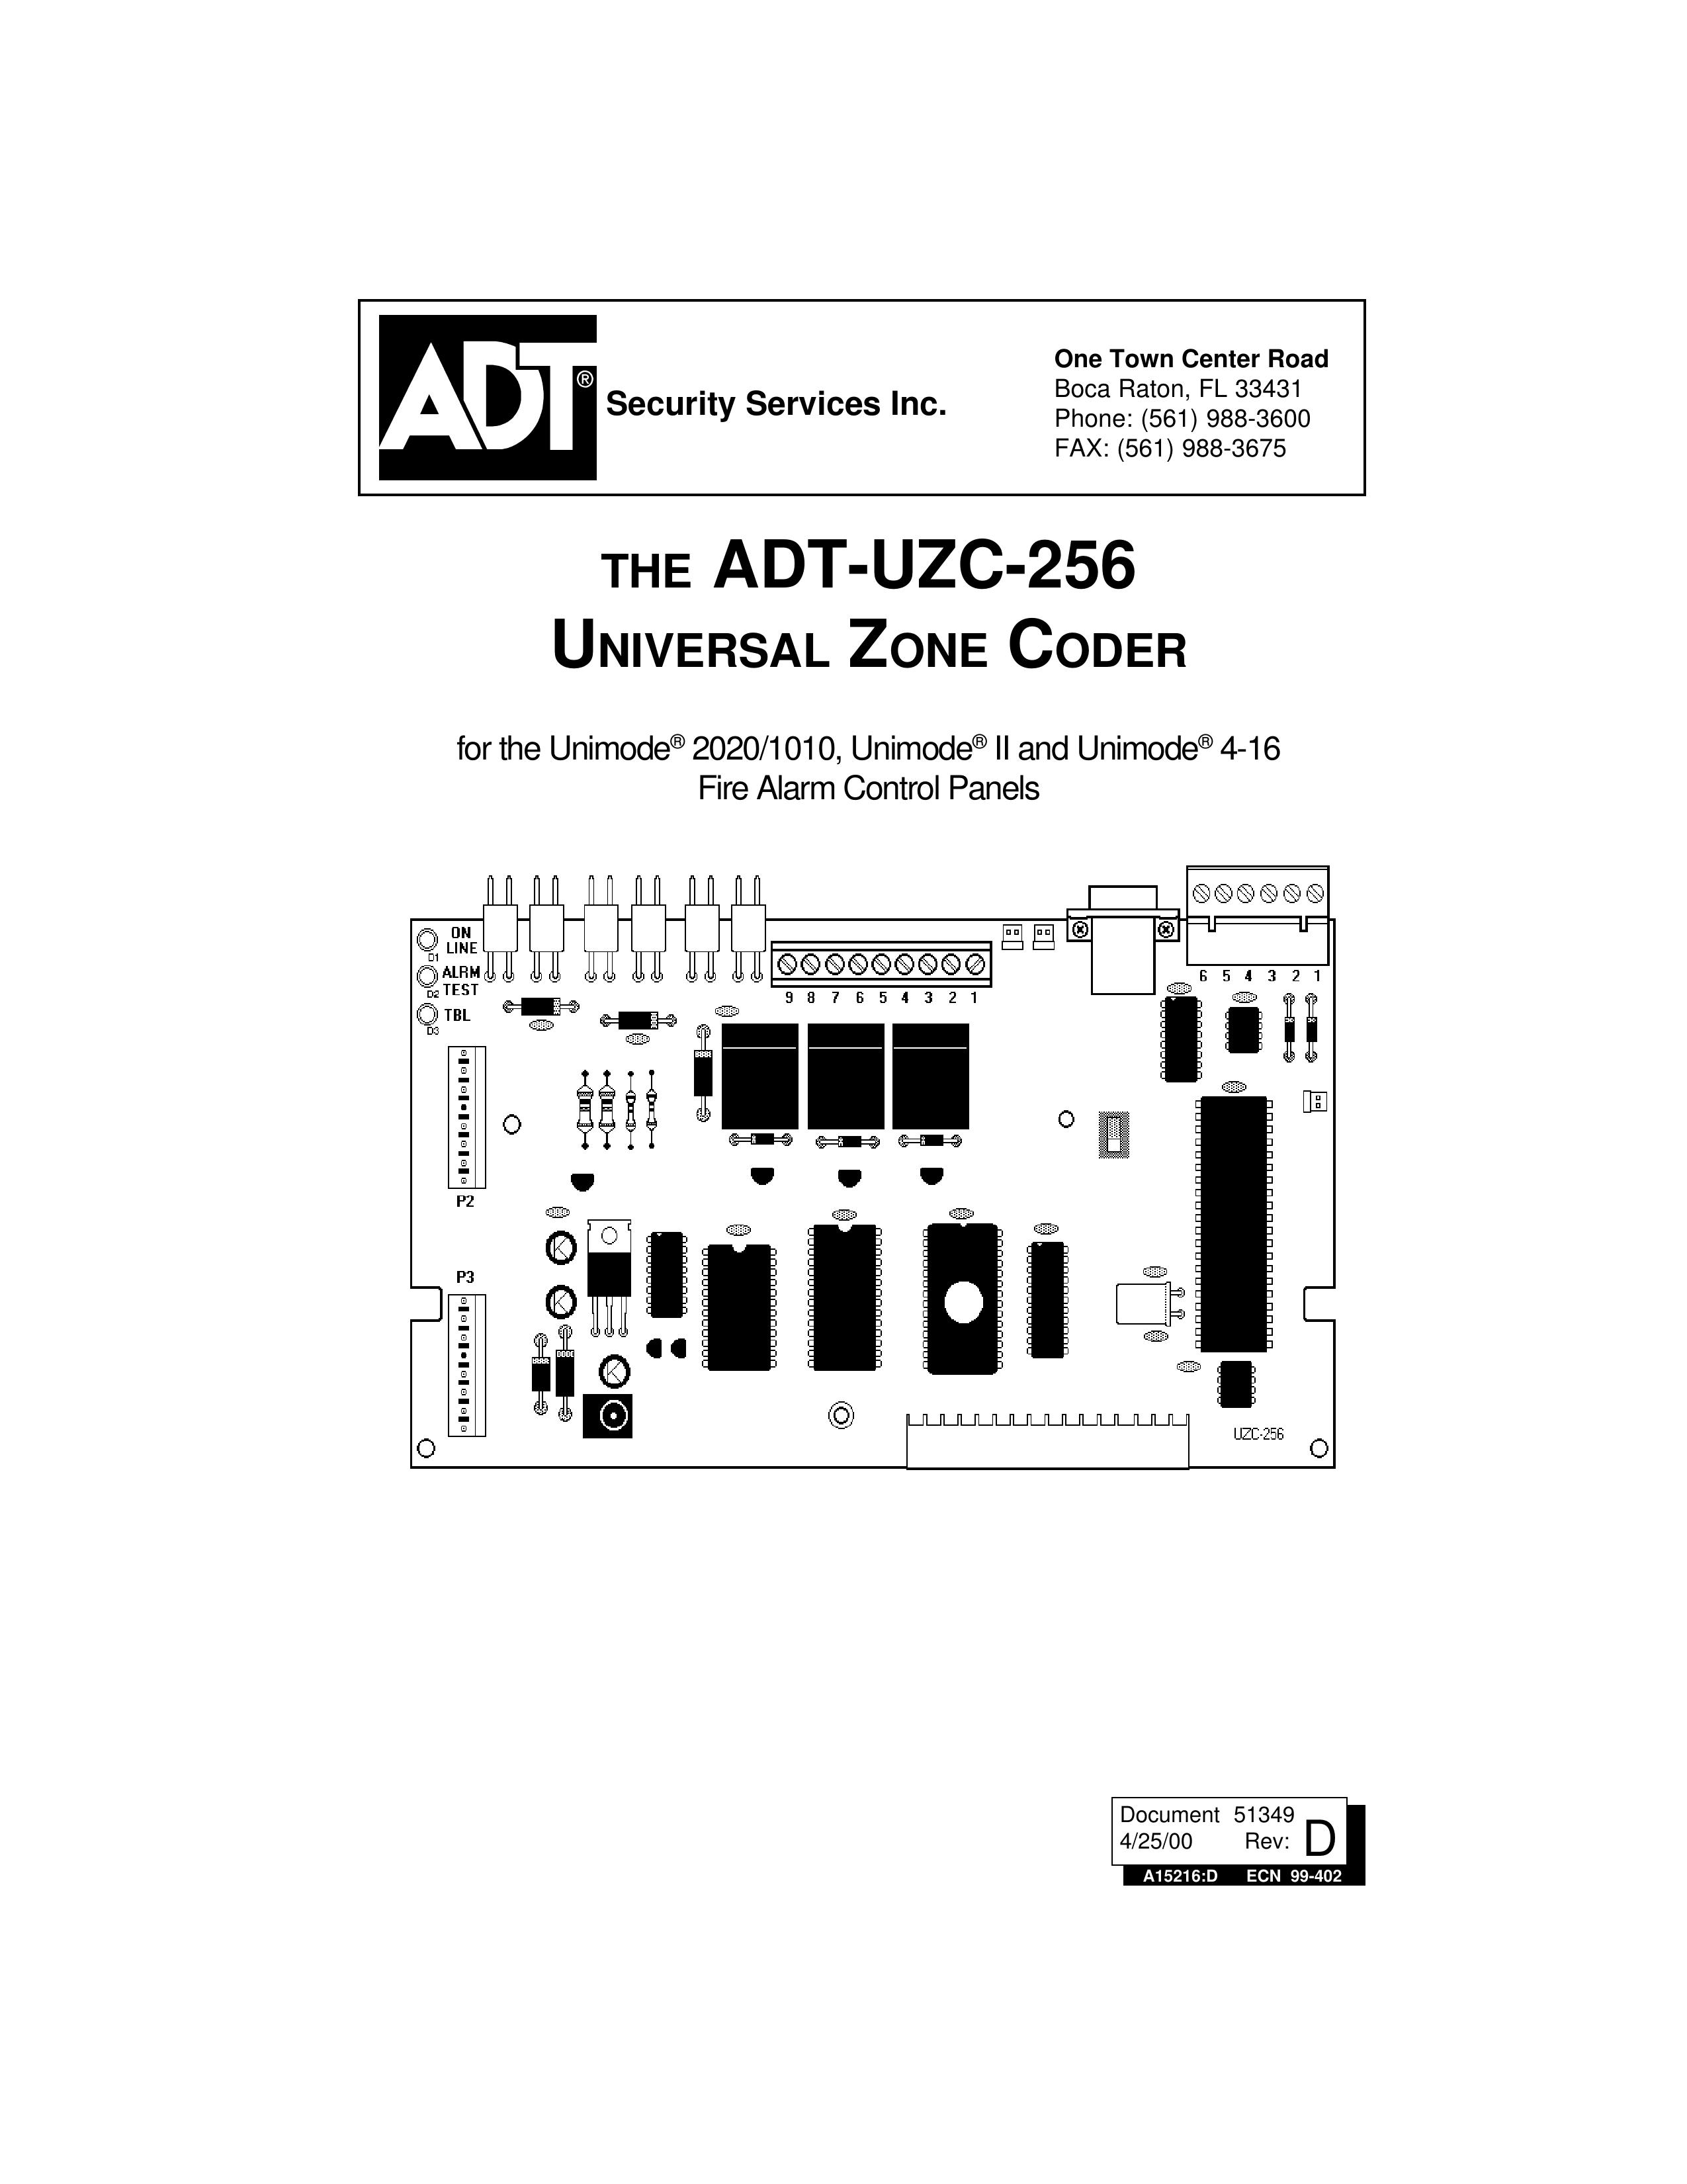 ADT Security Services Universal Zone Coder Medical Alarms User Manual